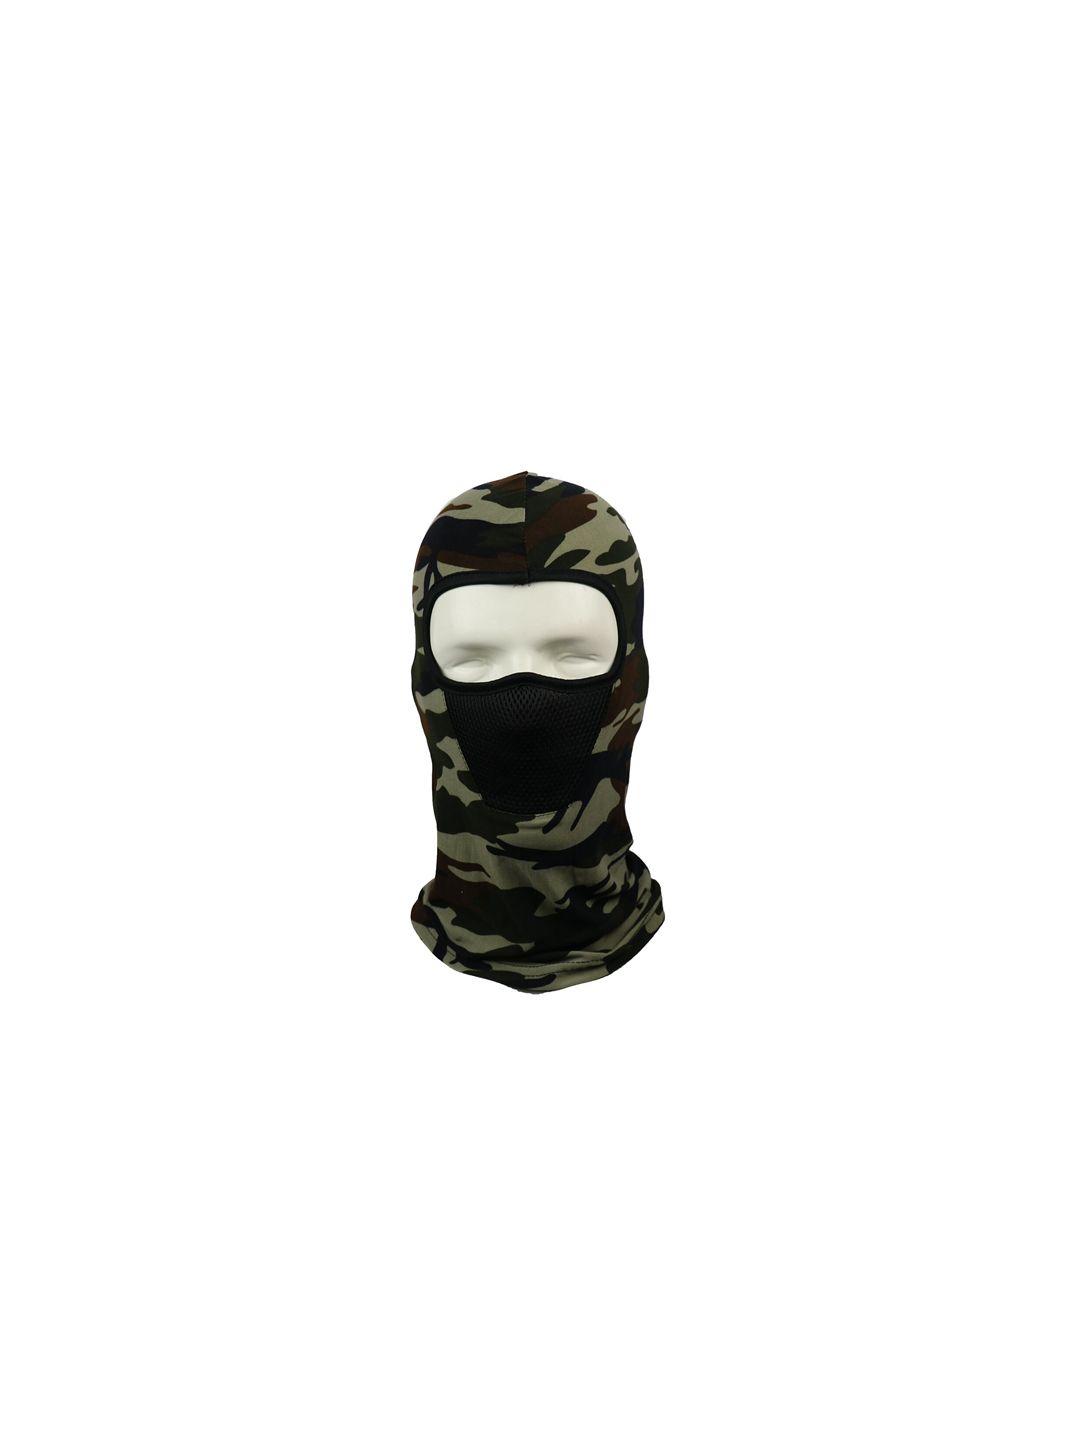 isweven unisex green & brown camouflage printed balaclavas mask